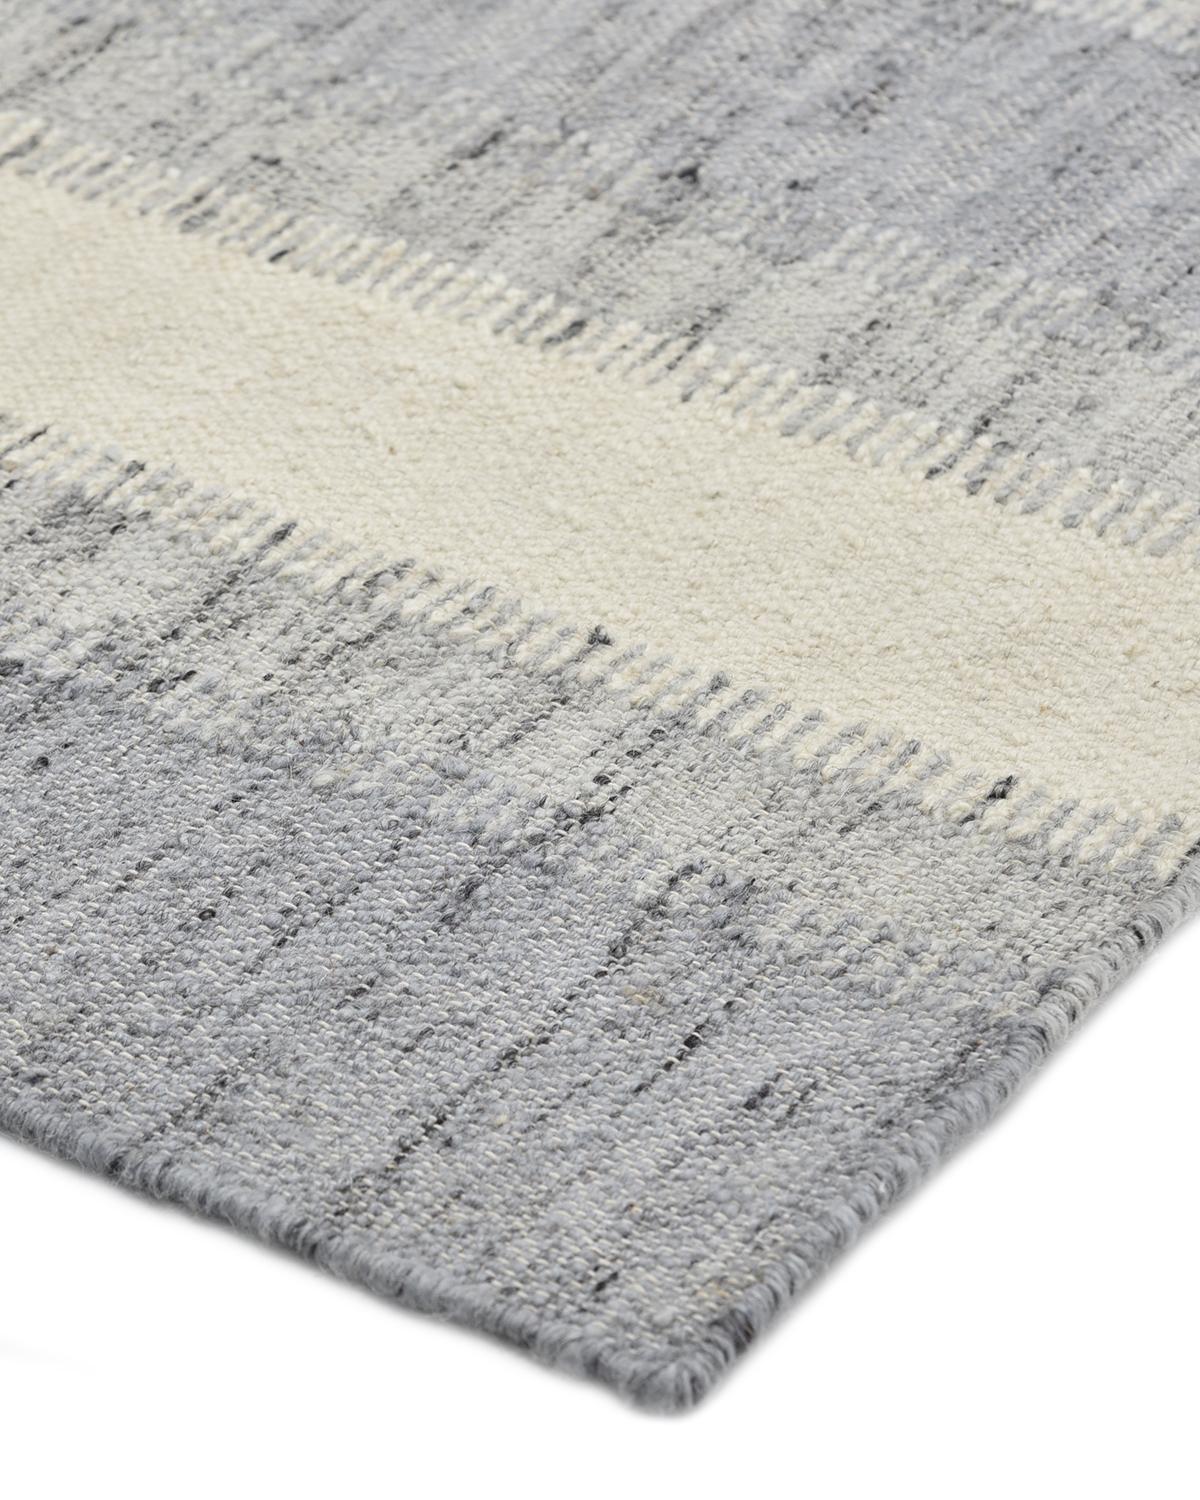 Durable and low-maintenance, flatweave rugs are especially popular for high-traffic rooms. The flatweave collection is beautiful as well as practical. The quiet patterns and understated colors make them suited for a traditional living rooms as well